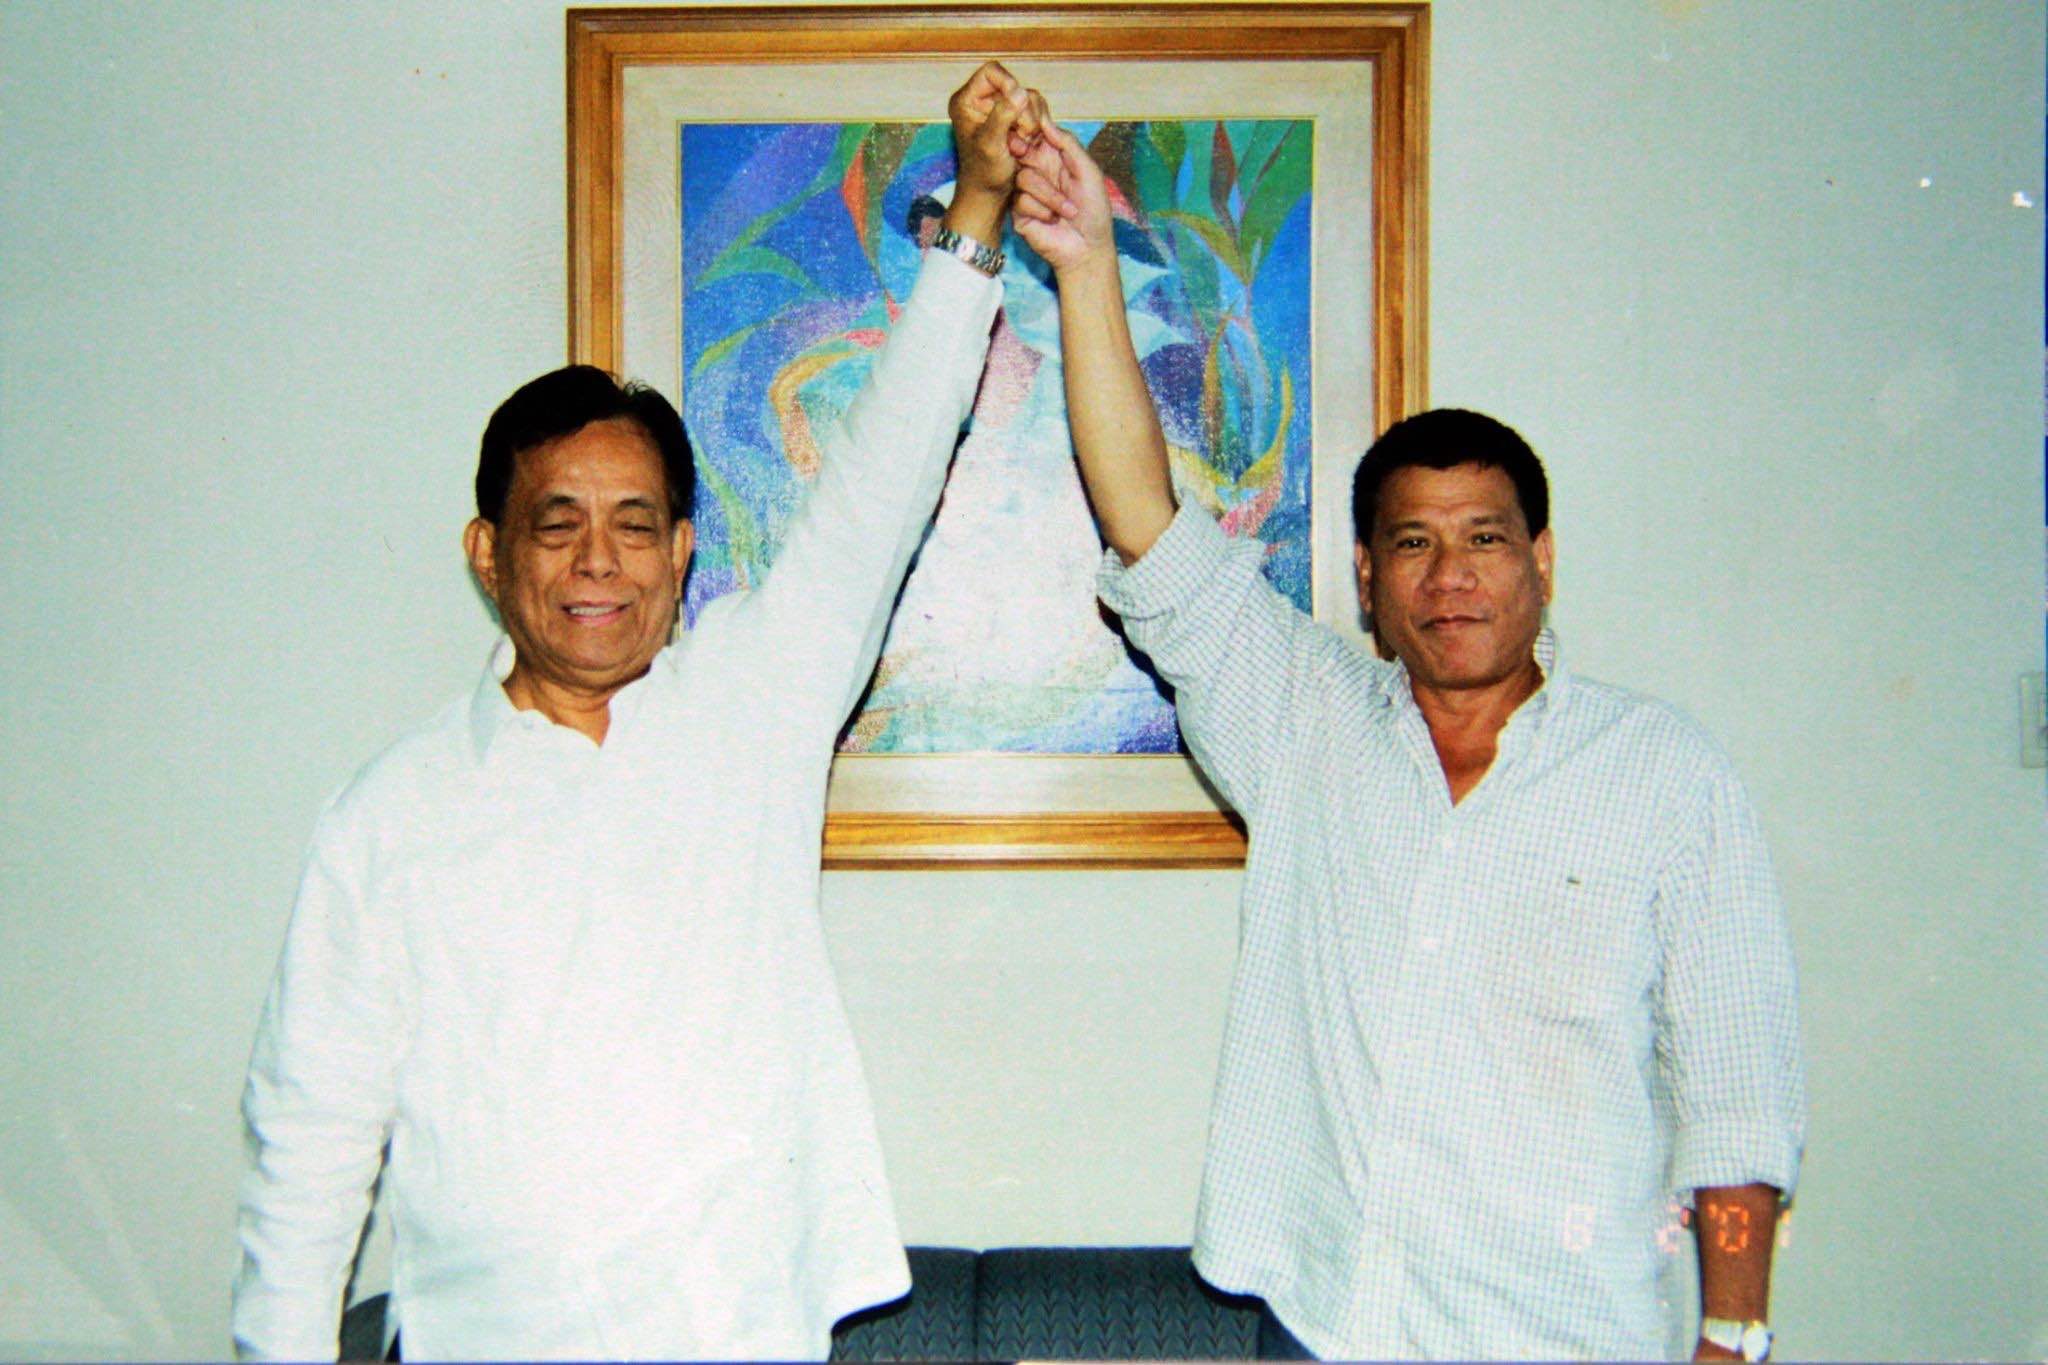 PDP-Laban. In this photo dated 2001, then-Davao City 1st District Representative Rodrigo Duterte took oath as a member of PDP-Laban before then-Senate President and Party Chairman Nene Pimentel Jr. Photo from Pimentel's Facebook 